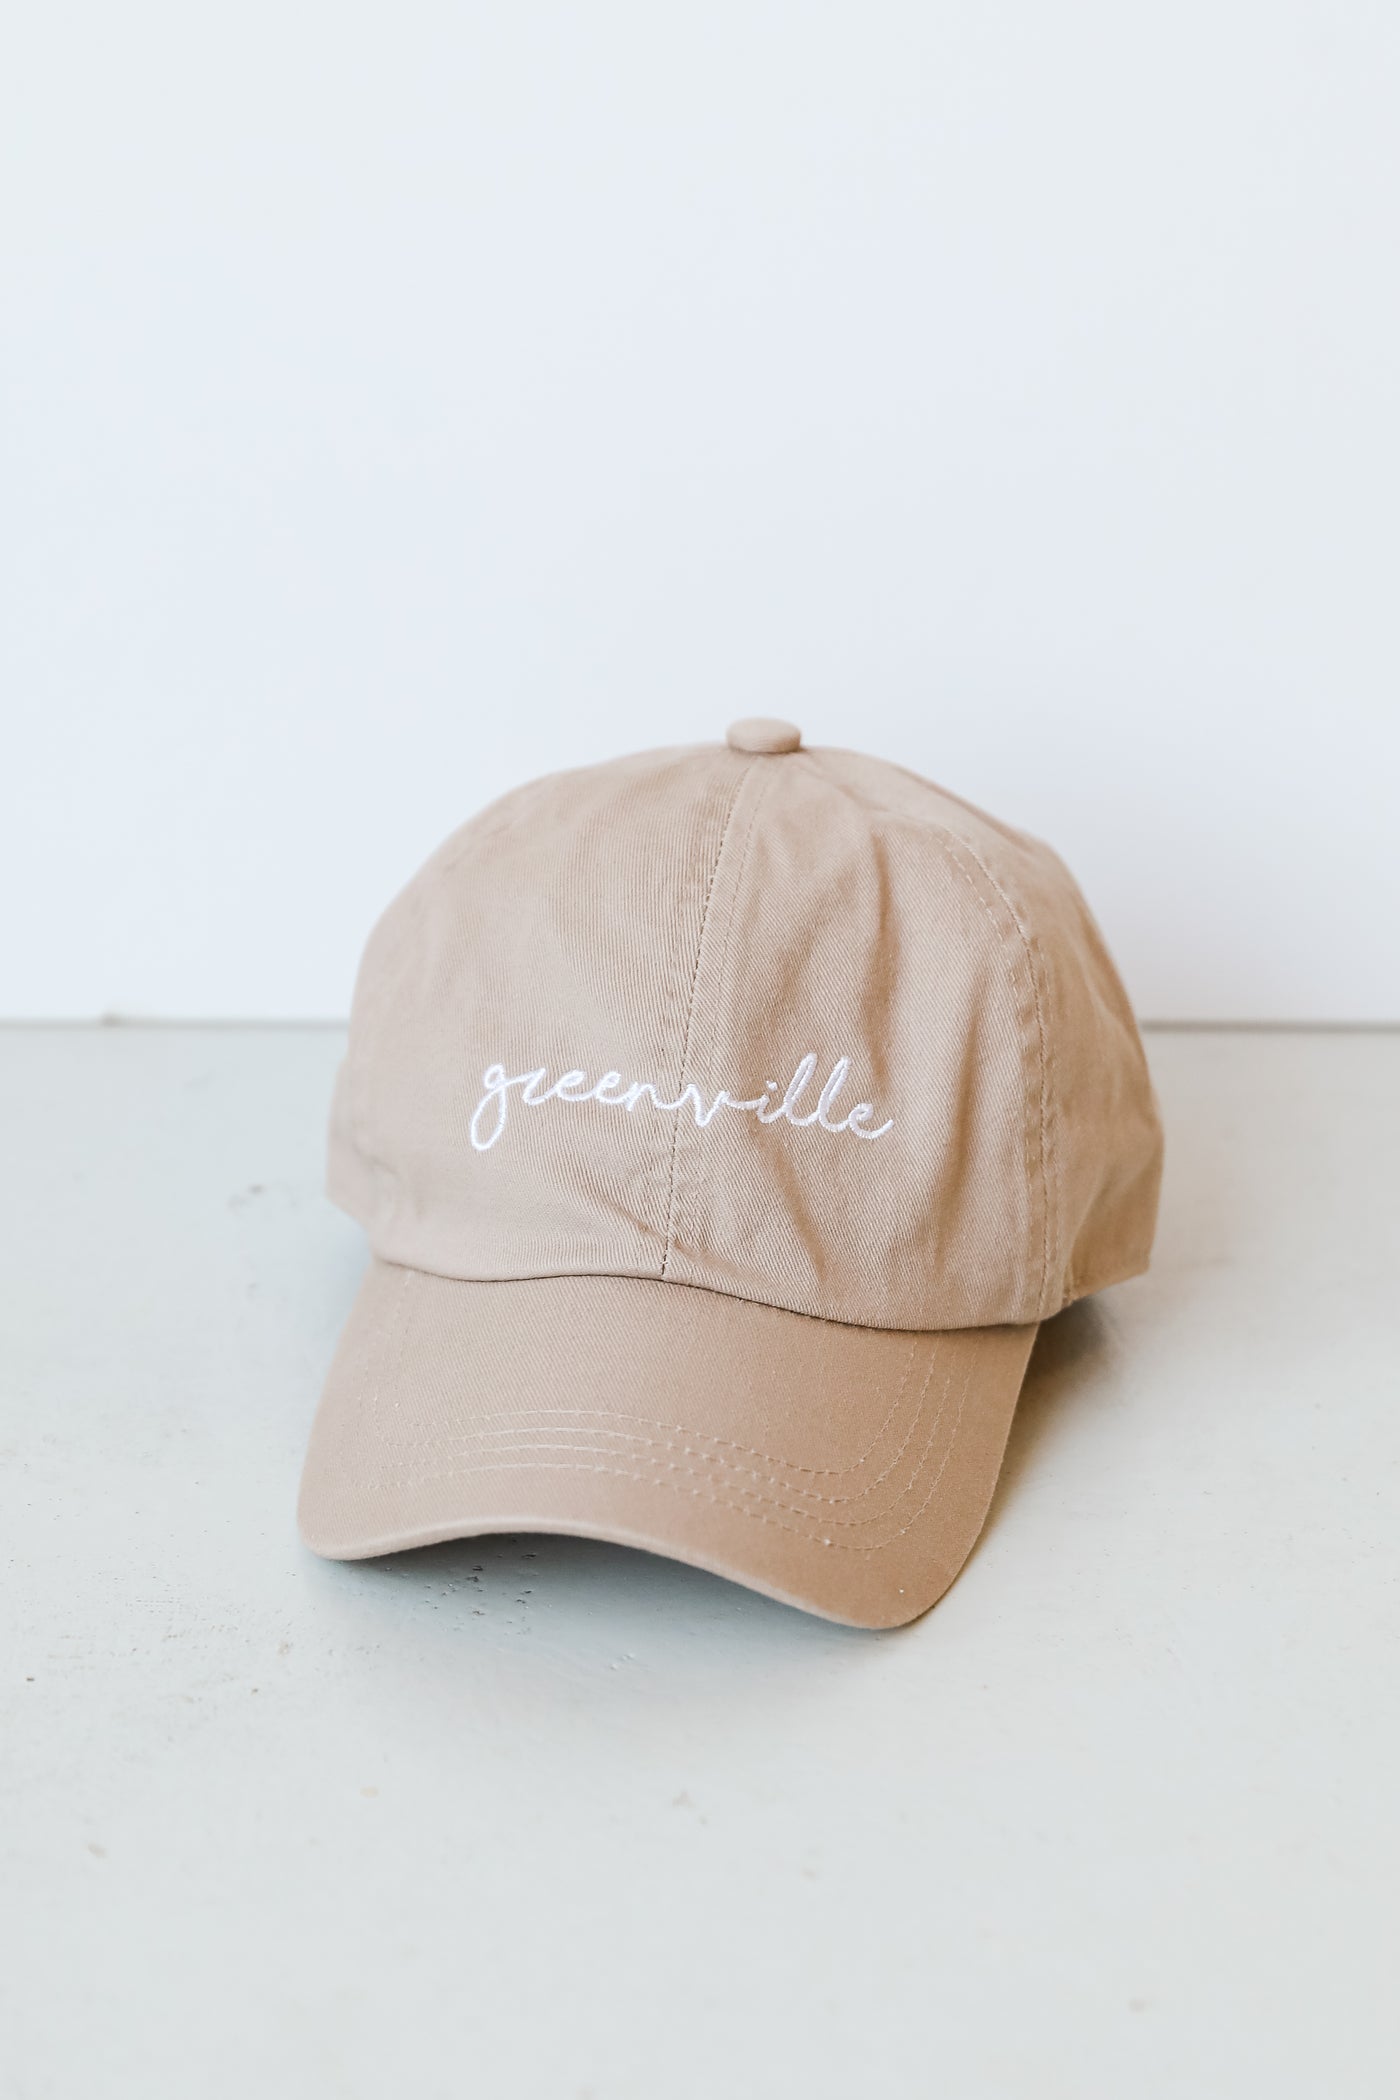 Greenville Embroidered Hat